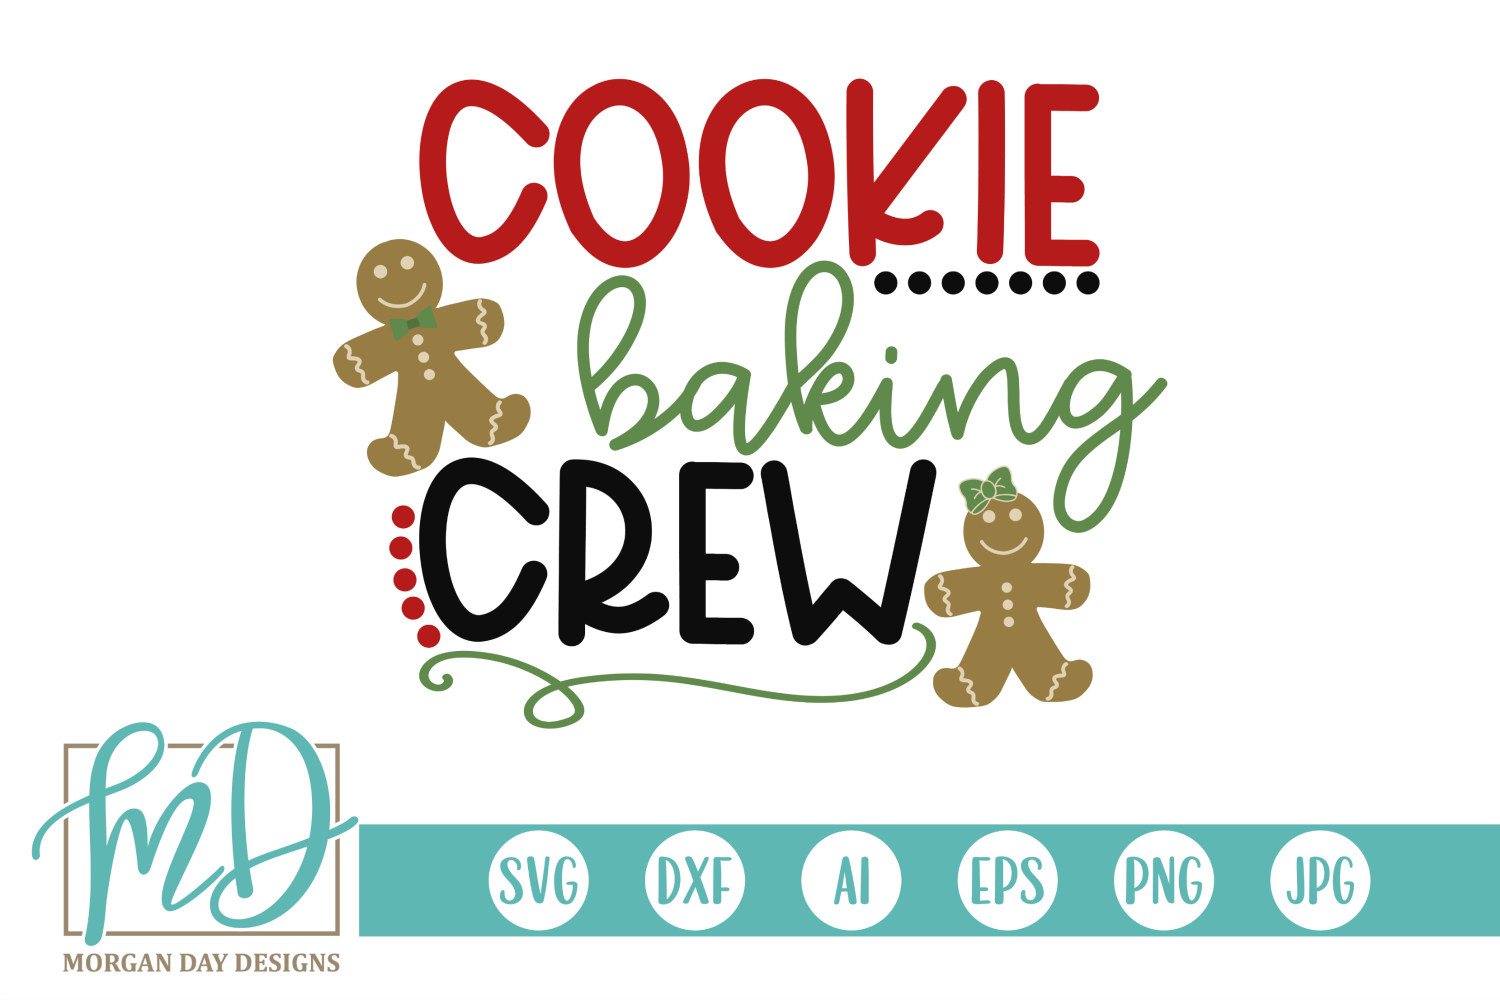 Cookie Baking Crew Svg By Morgan Day Designs Thehungryjpeg 